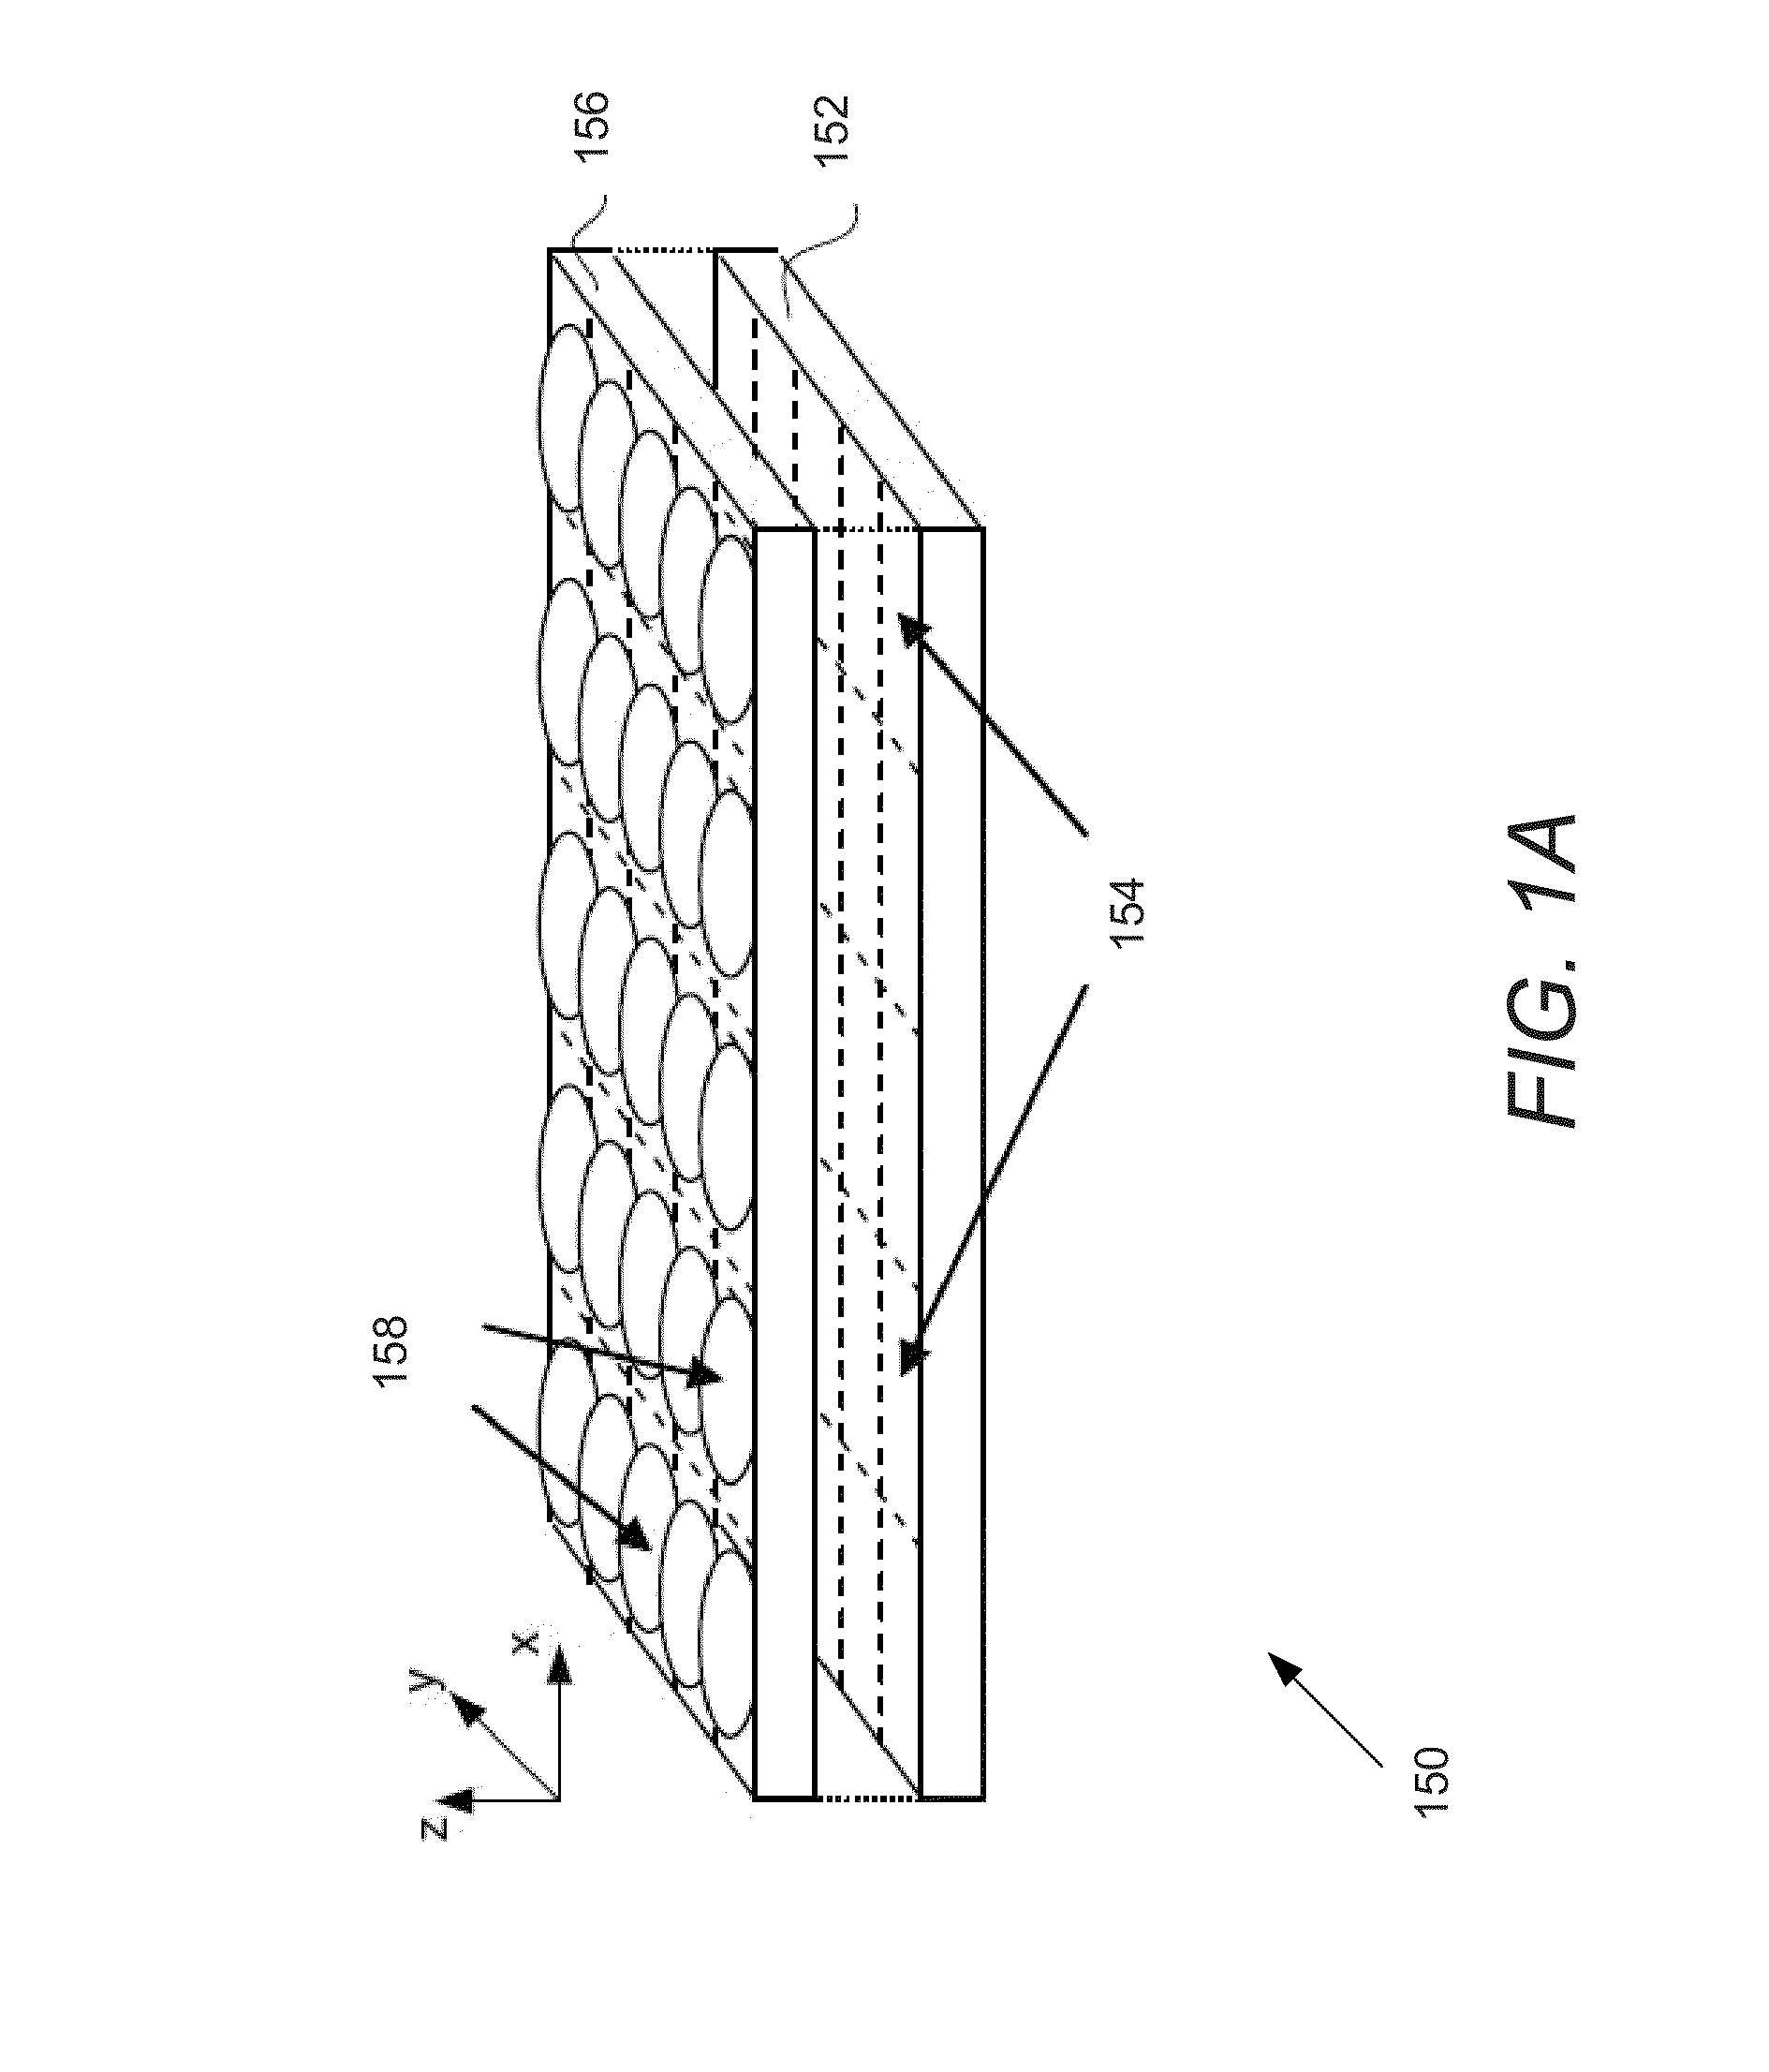 Systems and methods for performing depth estimation using image data from multiple spectral channels